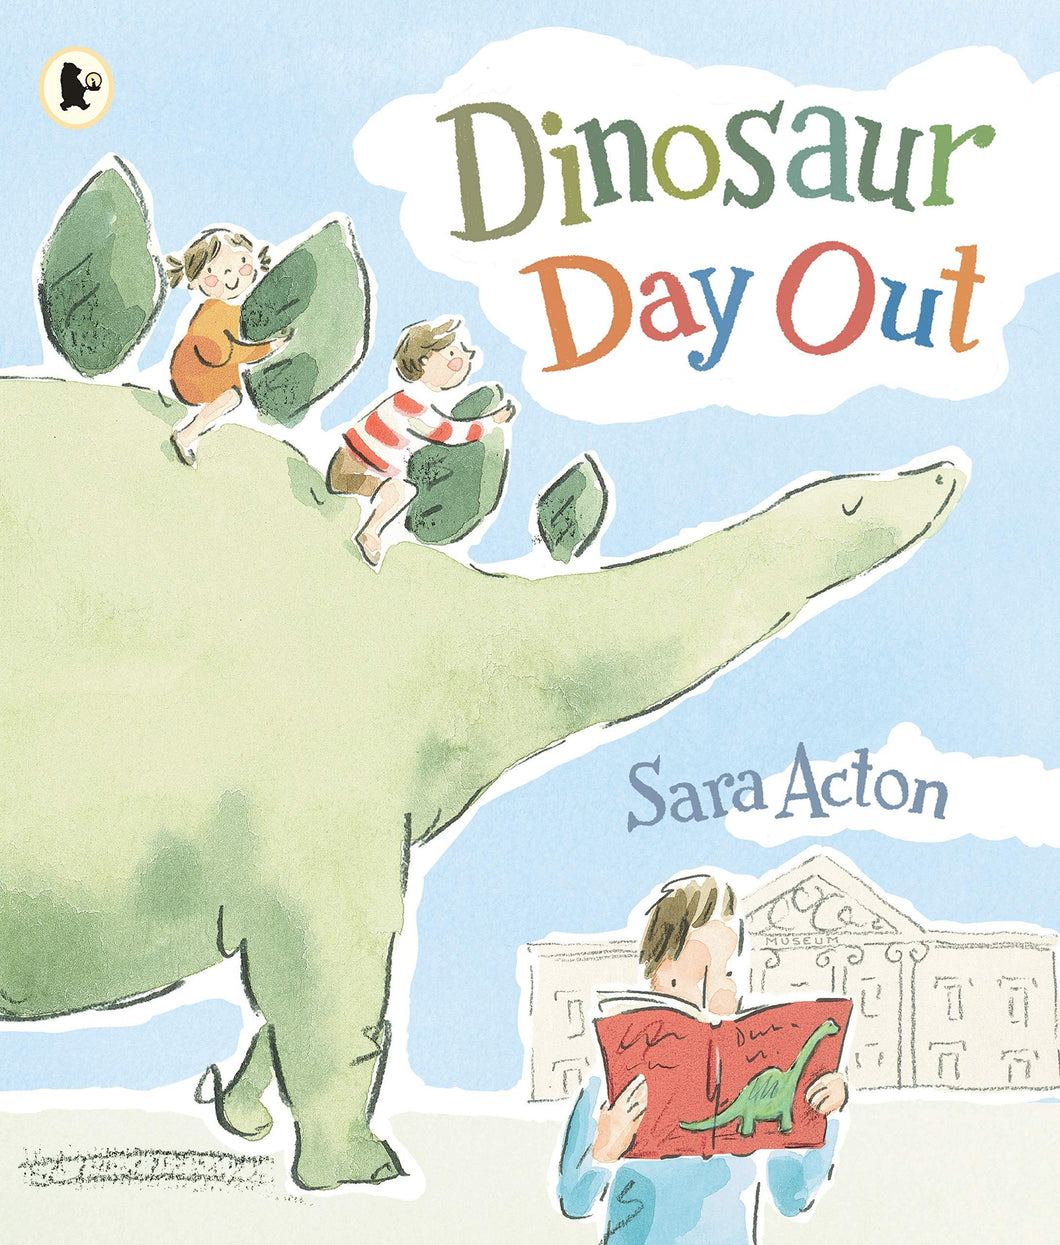 Dinosaur Day Out